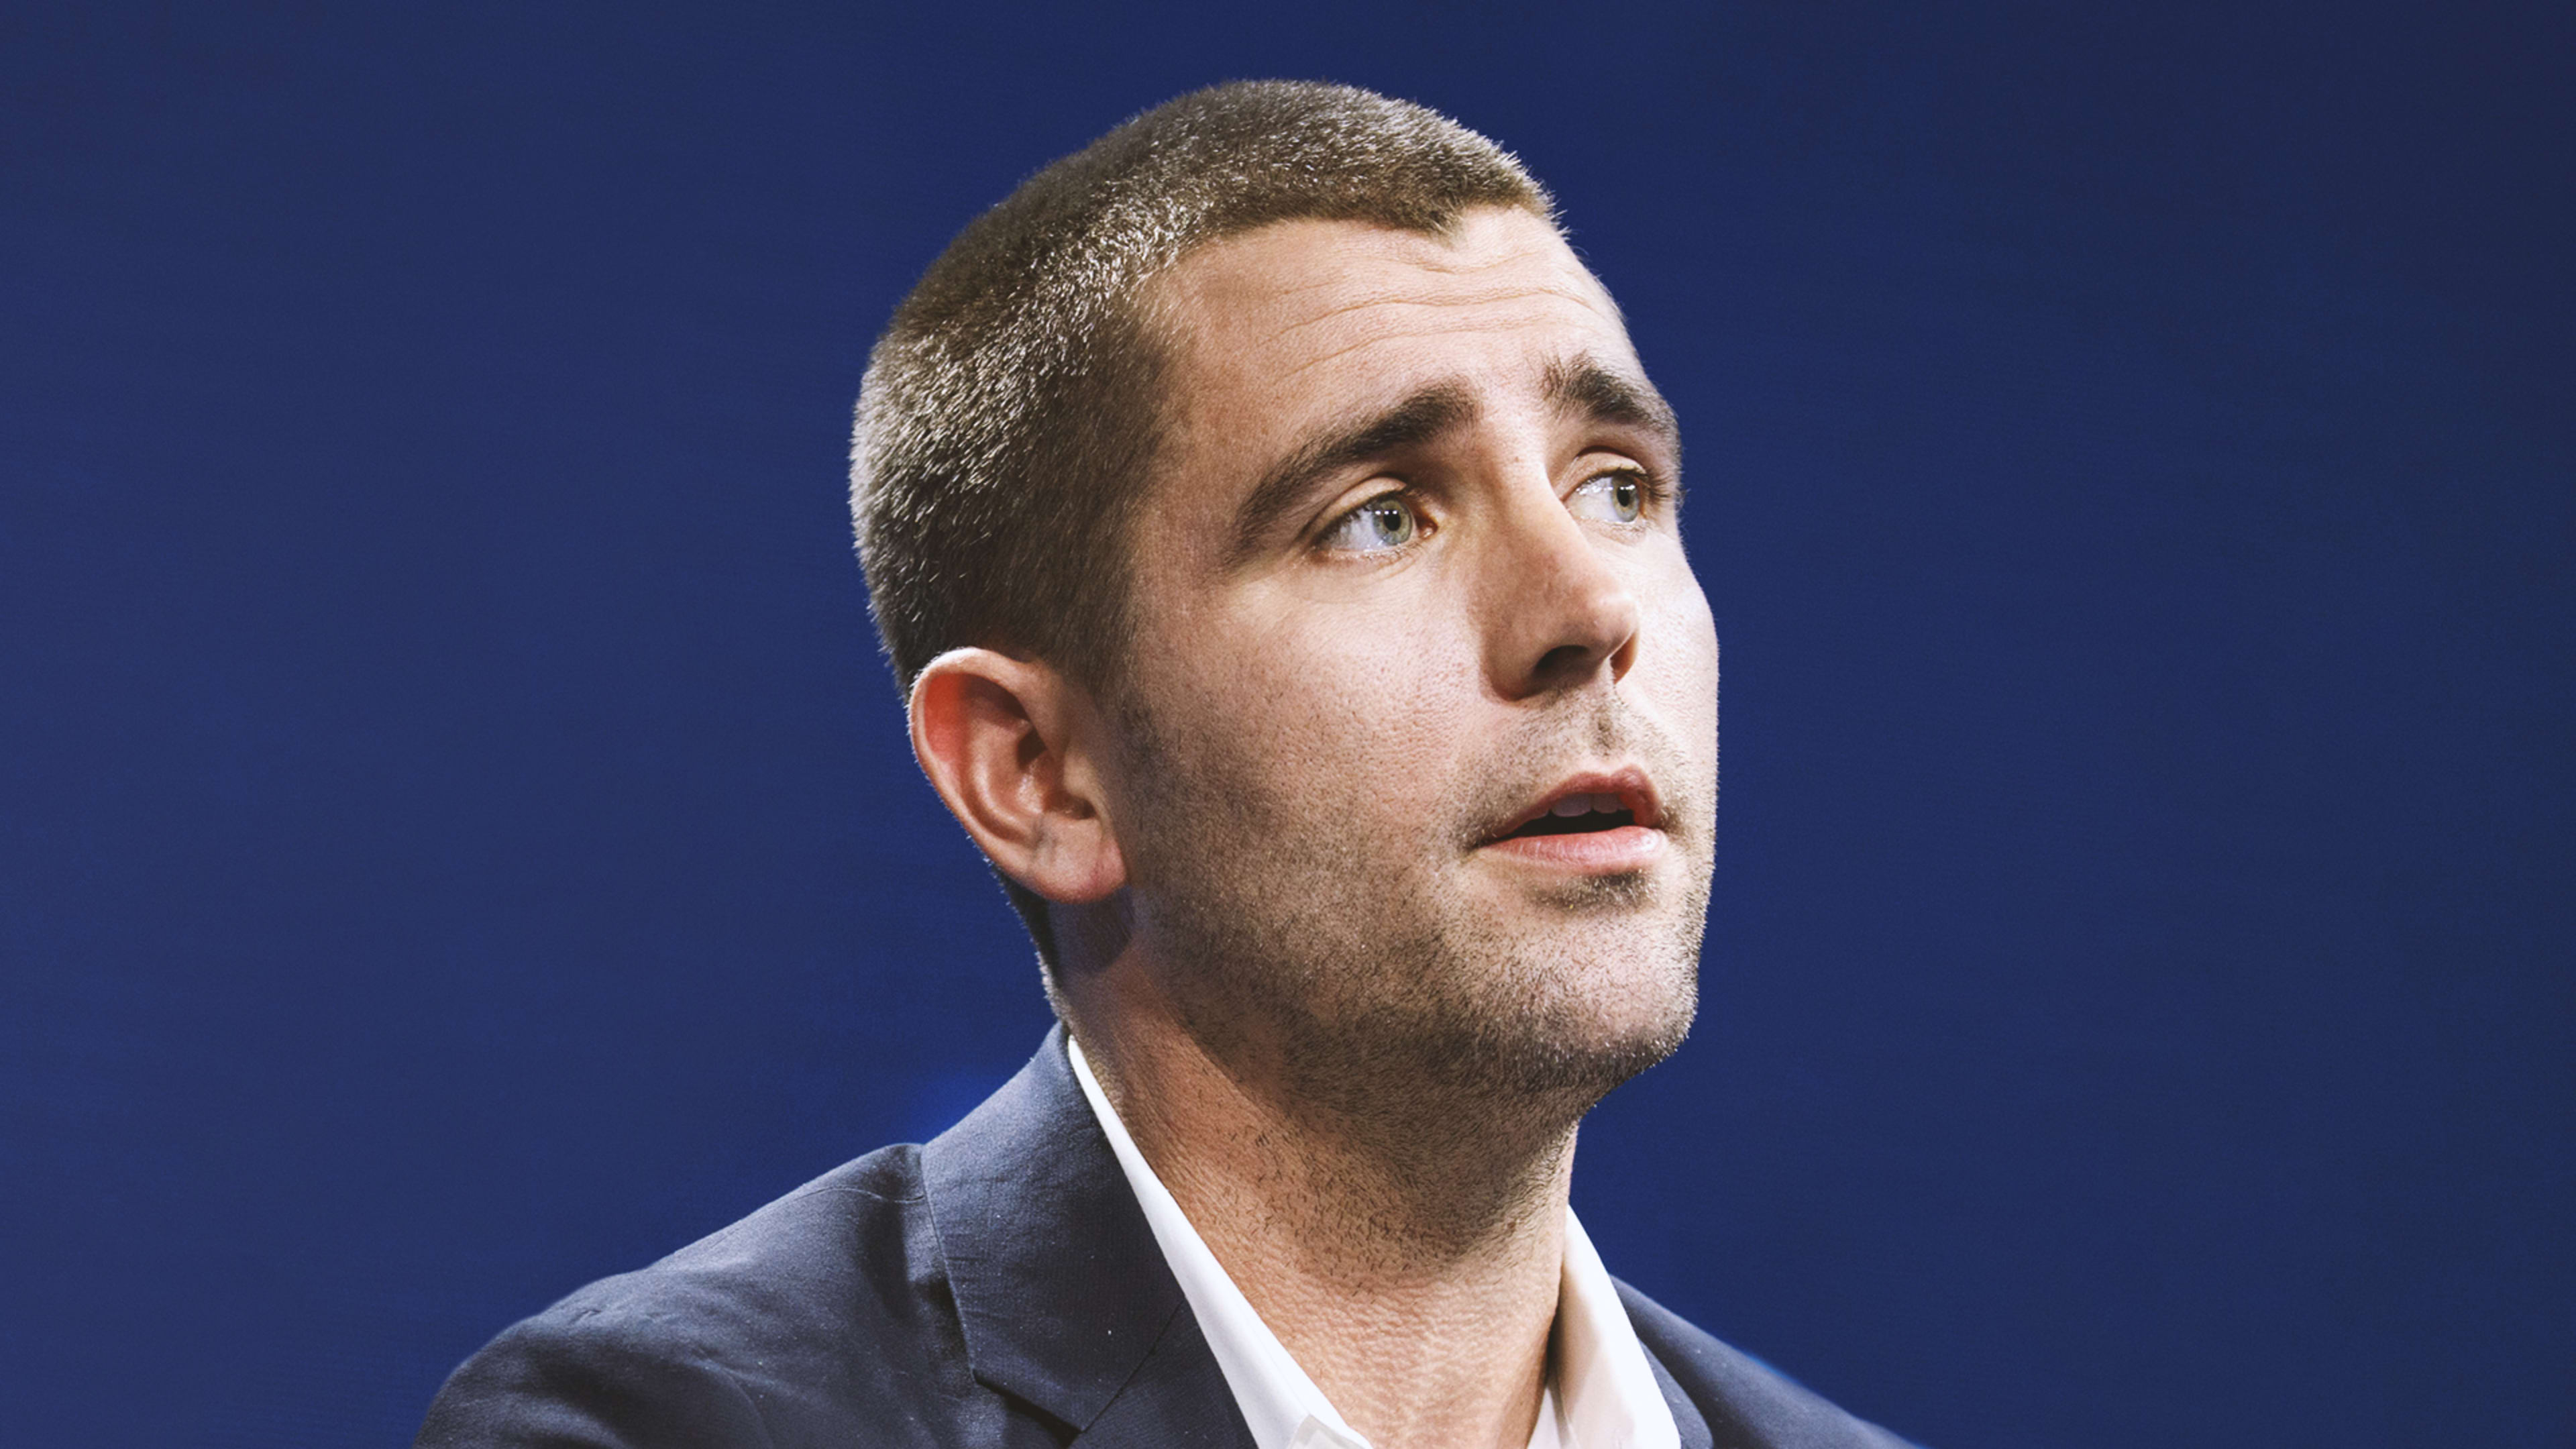 Facebook’s No. 3, Chris Cox, is leaving after privacy pivot